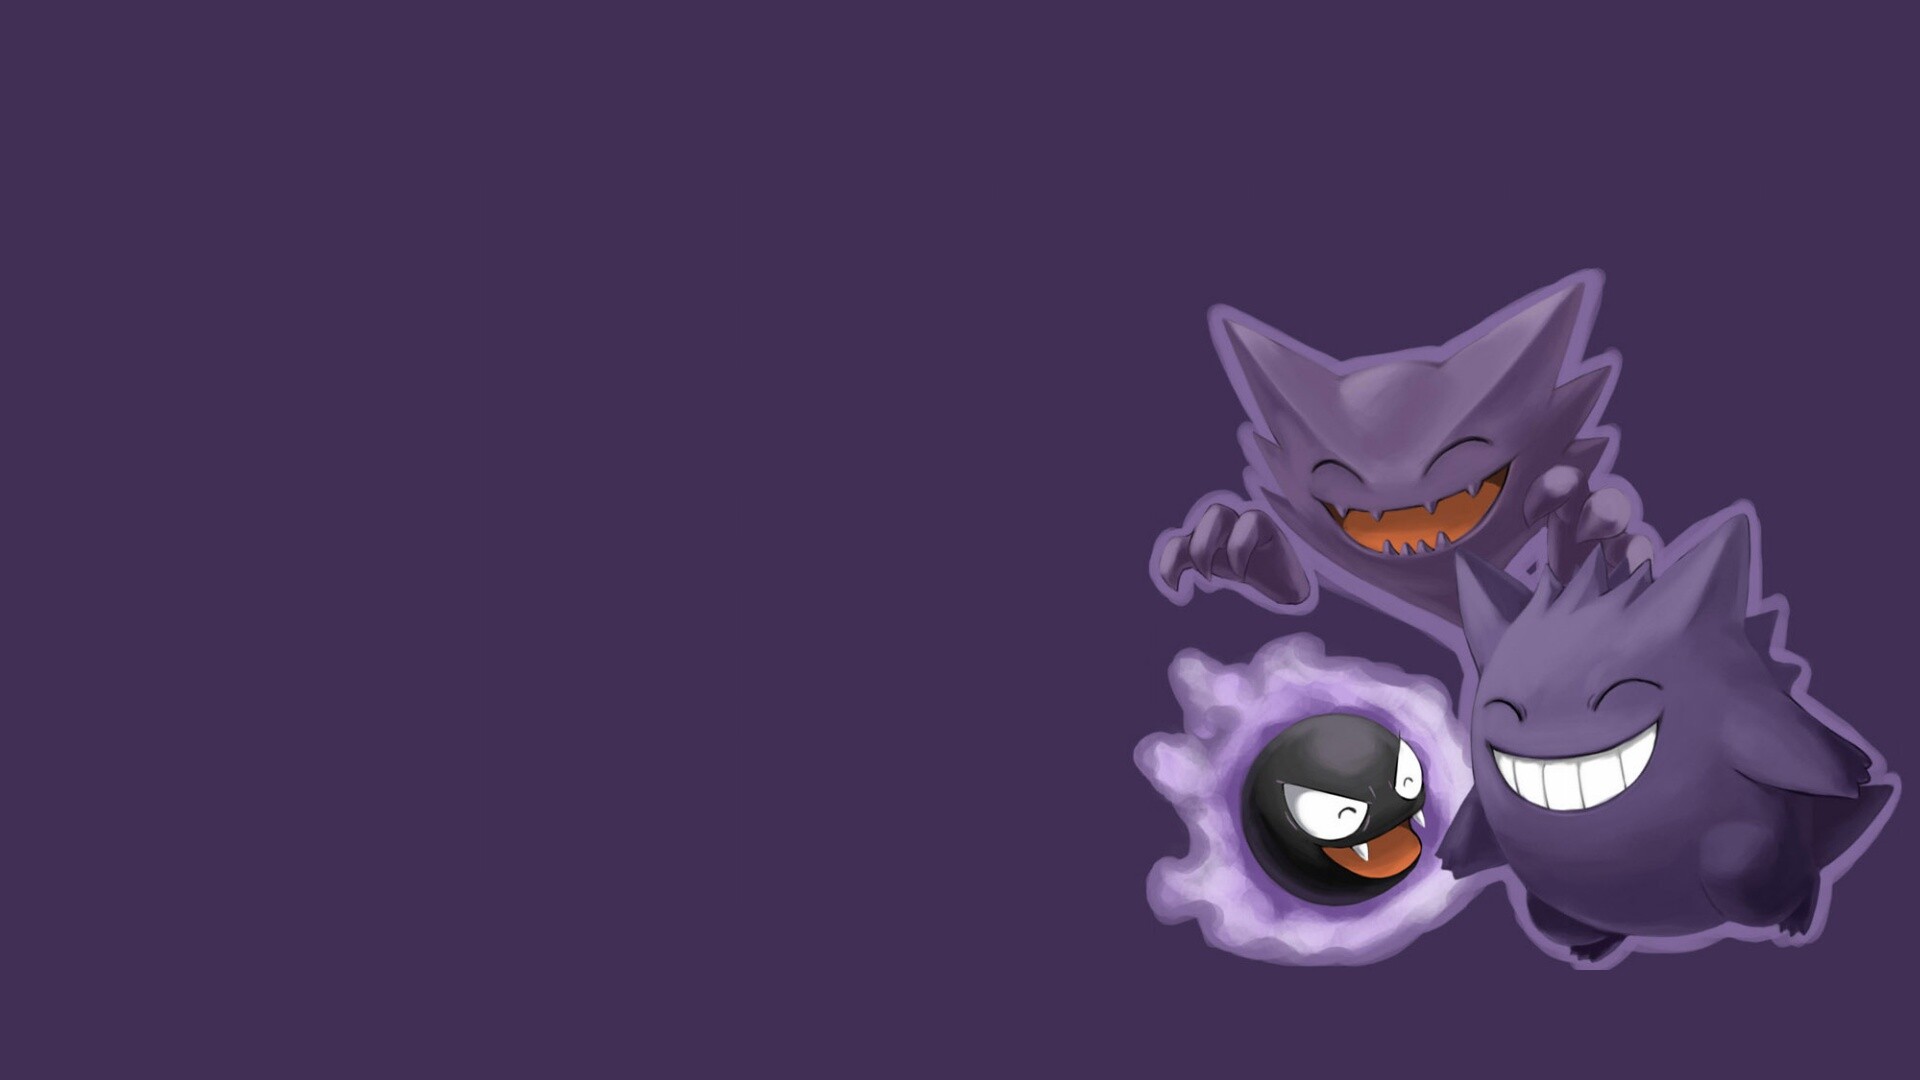 Gastly: Anyone would faint if engulfed by its vaporous body which contains poison. 1920x1080 Full HD Wallpaper.